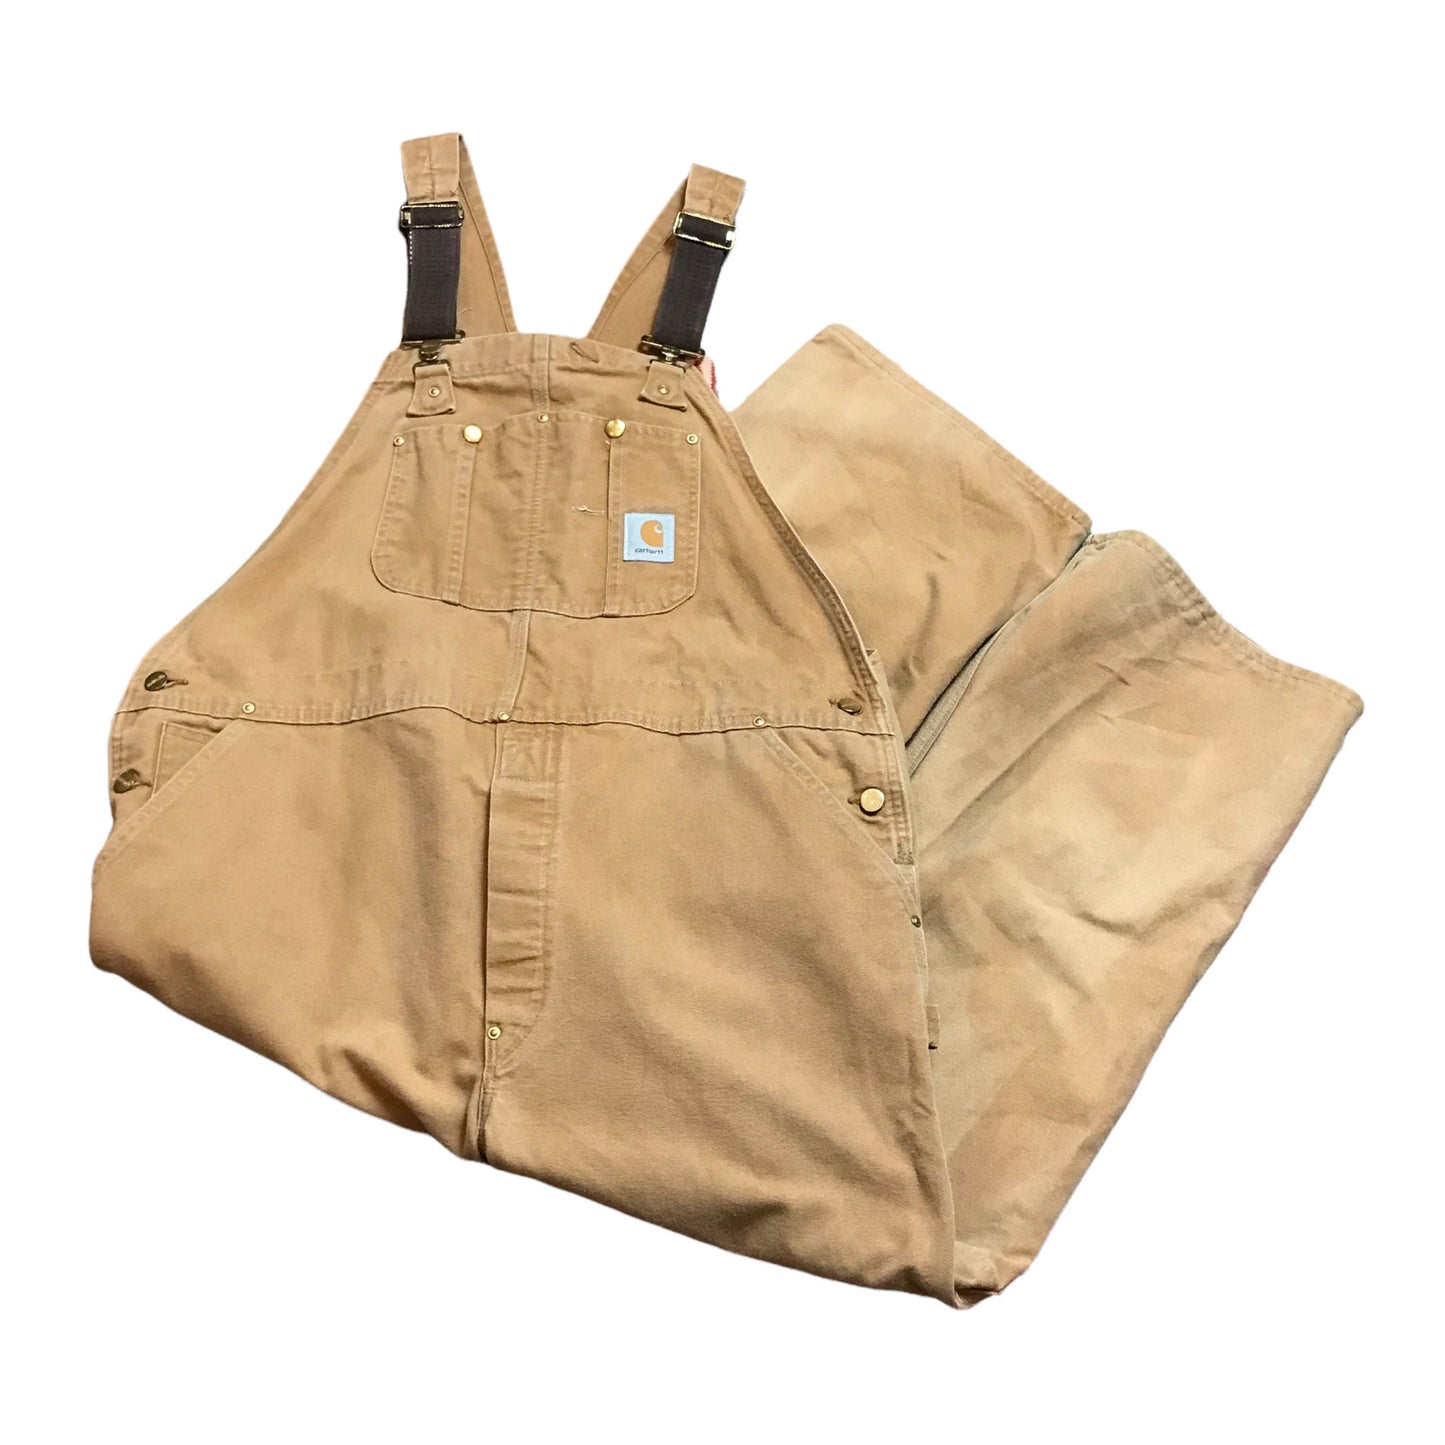 1990s Tan Carhartt Double Knee Overalls Made in USA Size 42x26.5